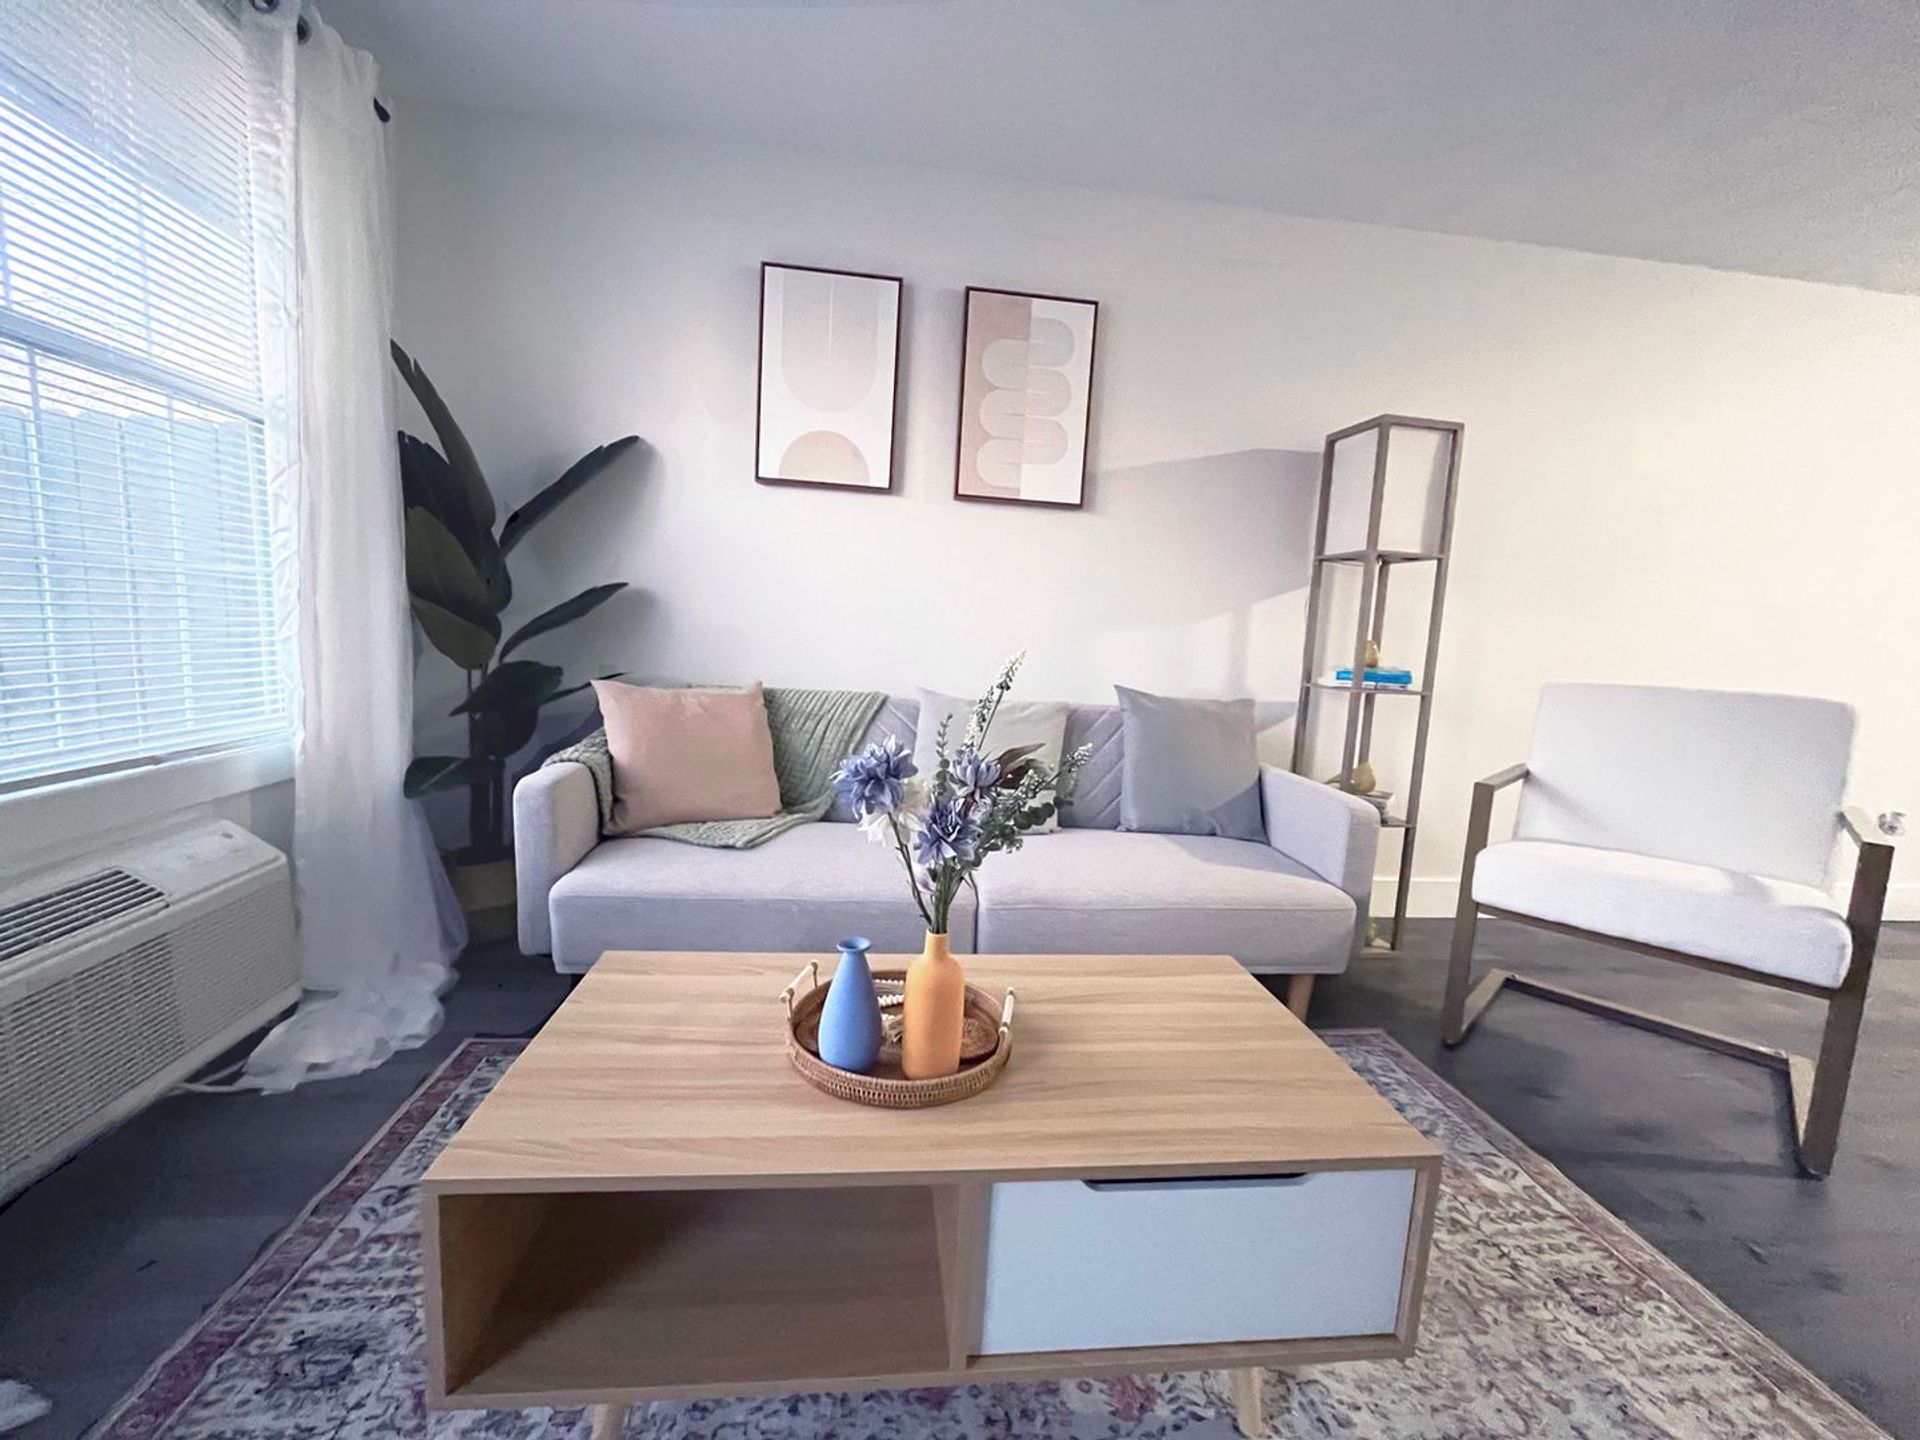 2 Bed and 2 Bath Apartments with In-Unit Laundry for Rent | Completely Renovated Image